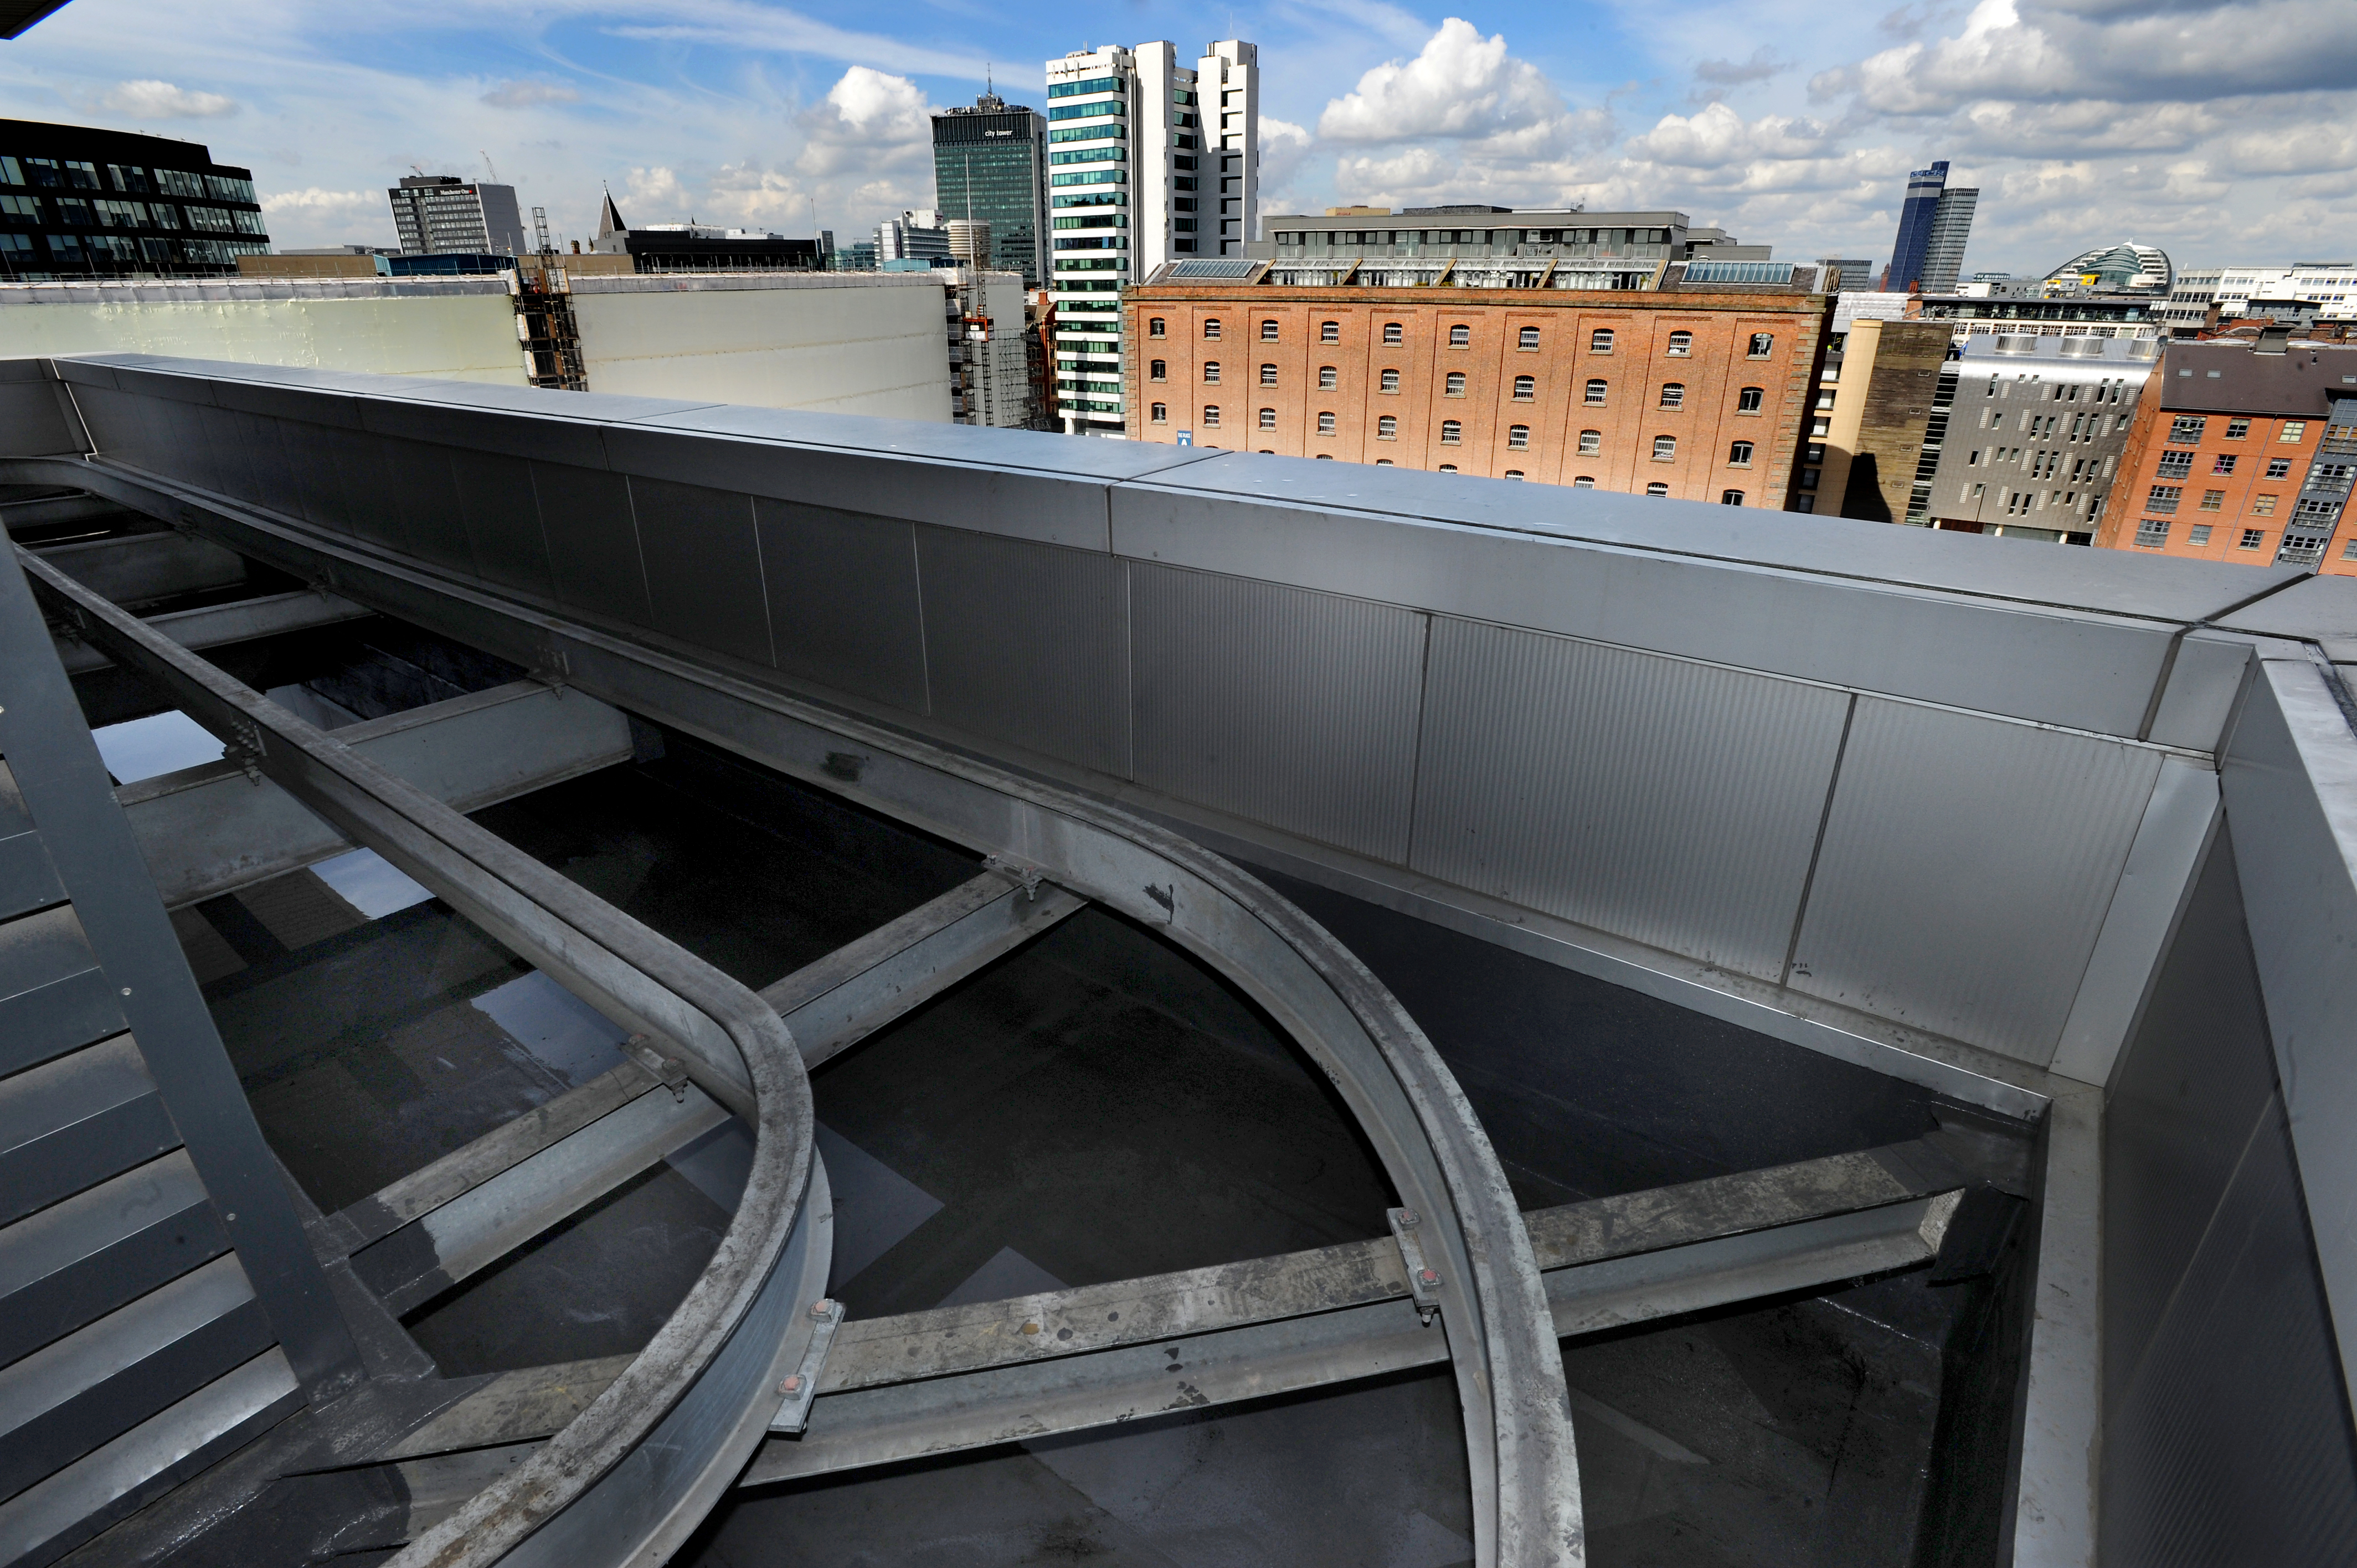 Piccadilly Gate offices, Manchester. Re-sealed roof by Castle Construction with Kemper Systems. Picture by Paul Heyes, Wednesday April 13, 2016.